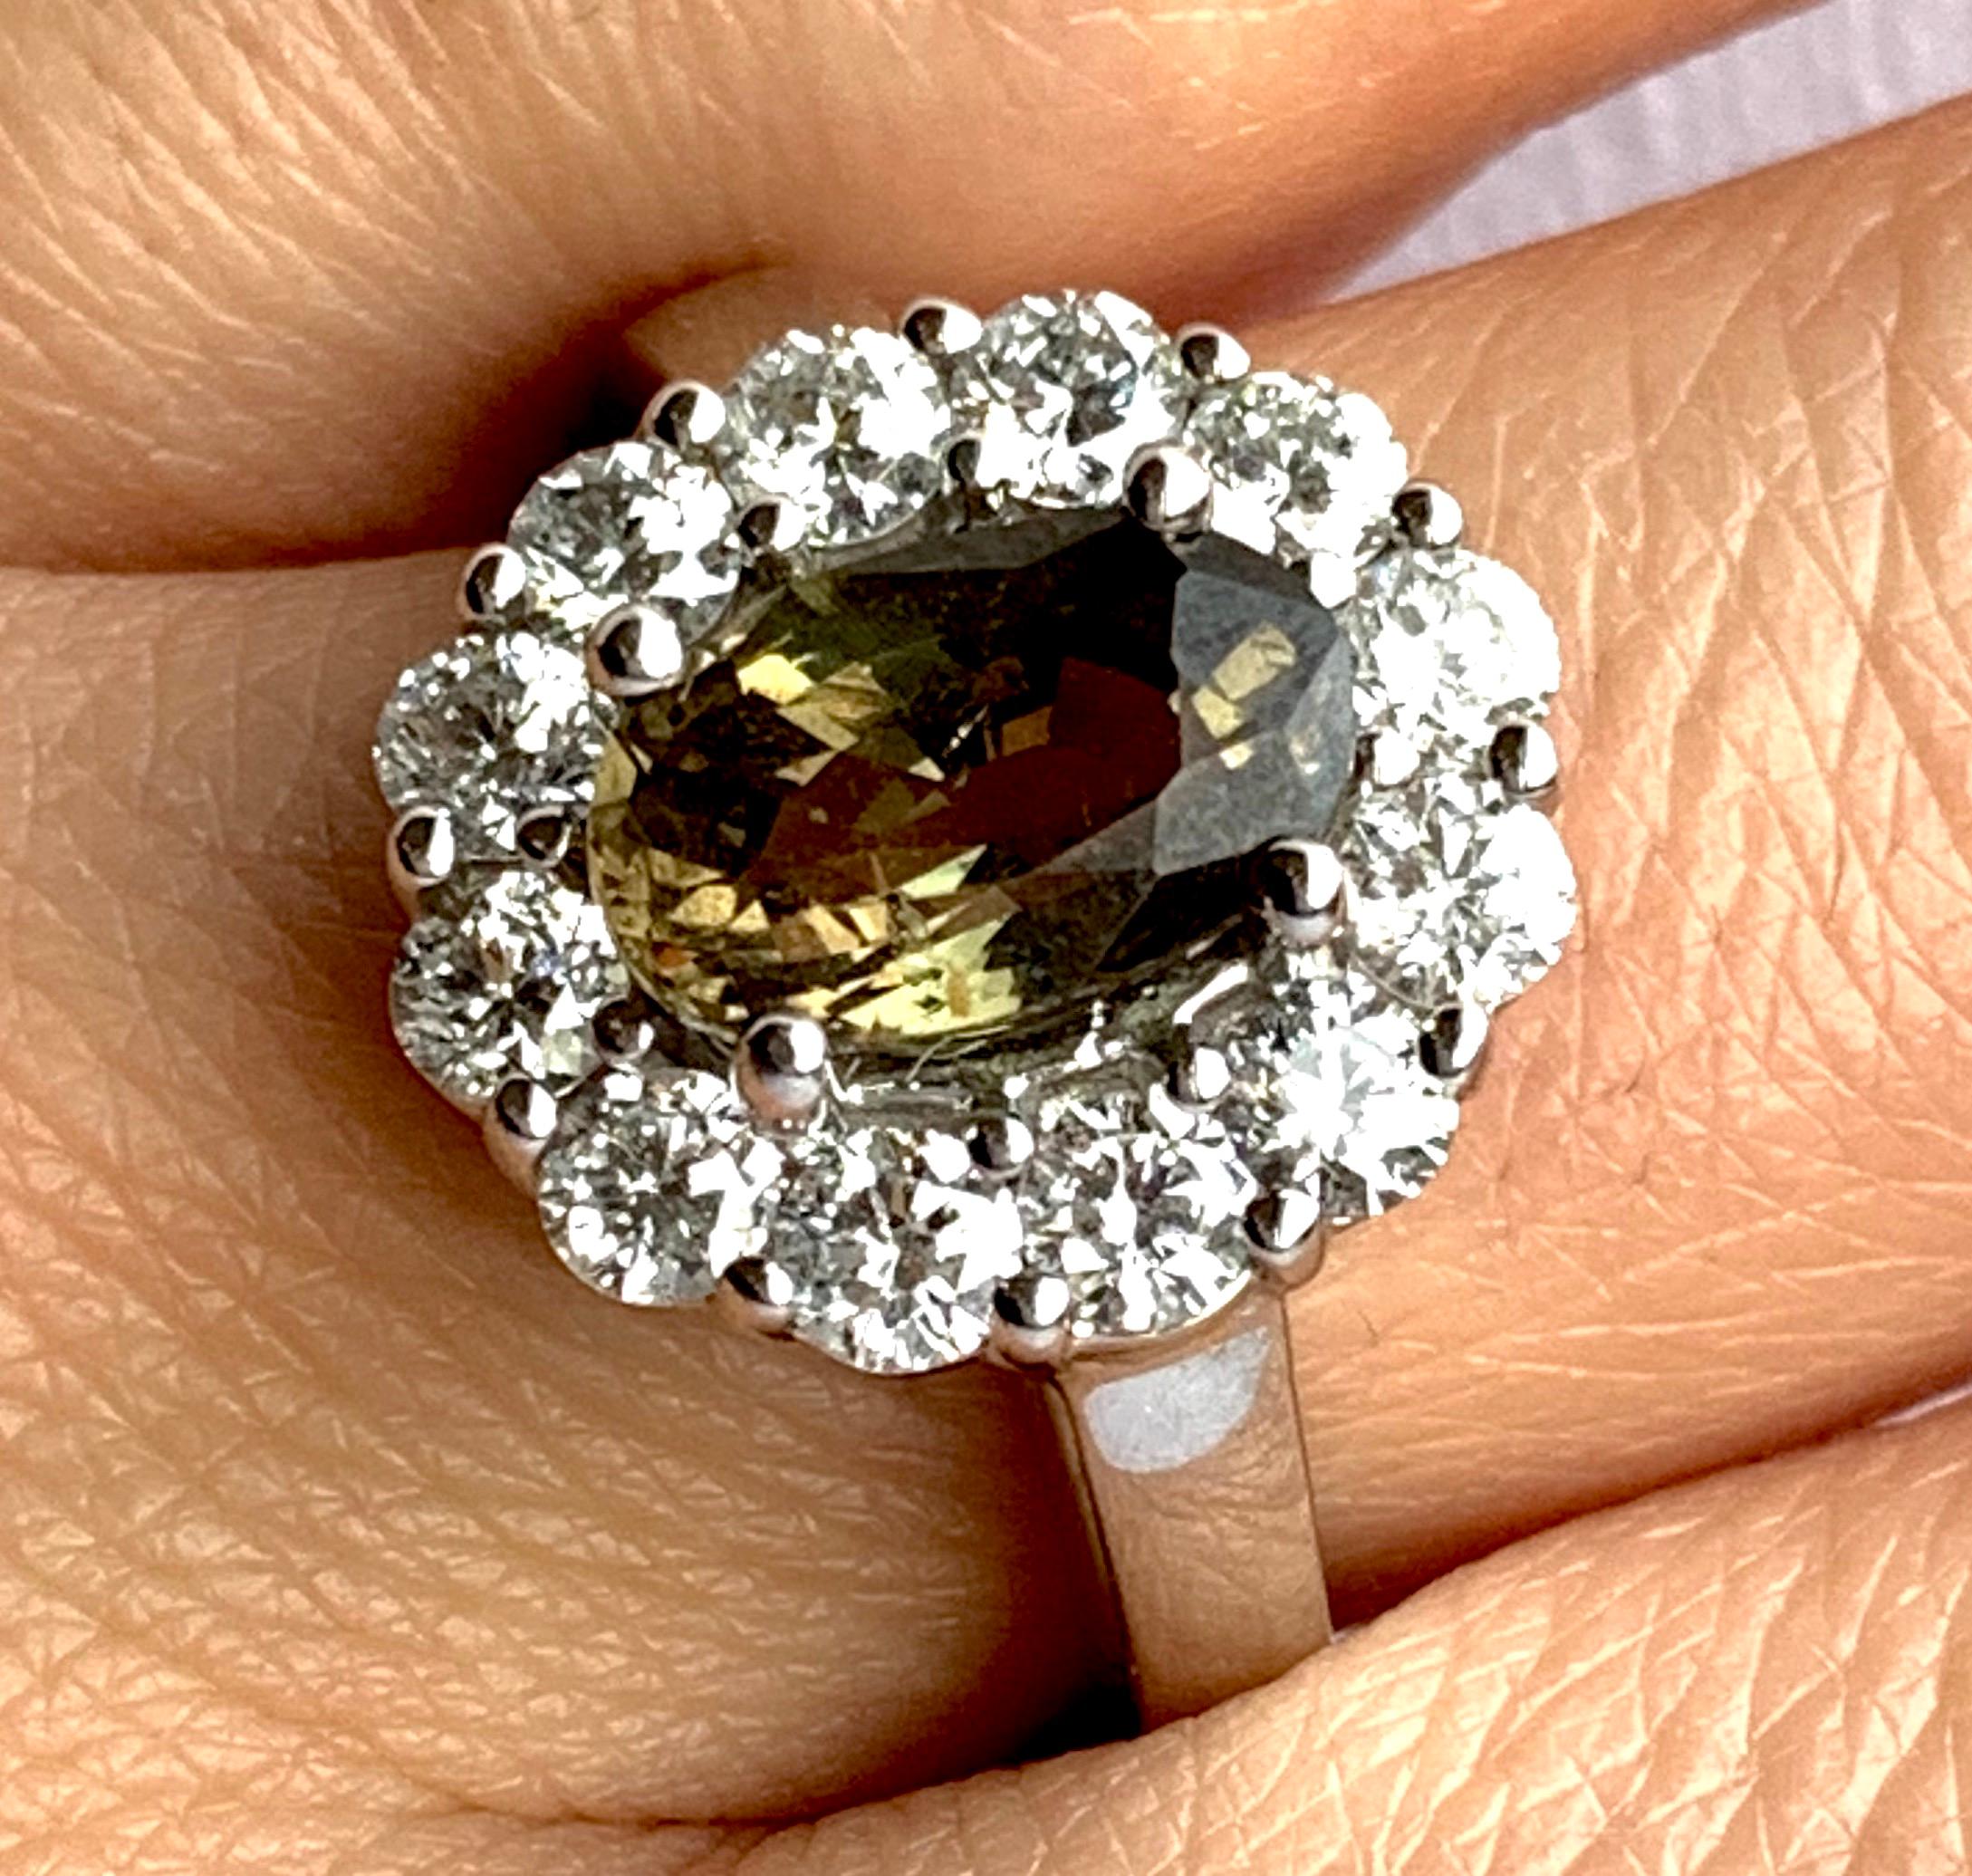 This GIA Certified Alexandrite is truly a special stone. Changing color in light, the 2.23 carat stone ranges from yellowish green to brown-yellow. Surrounded by petals of brilliant white diamonds totaling 0.61 carats, this is a piece you don't want